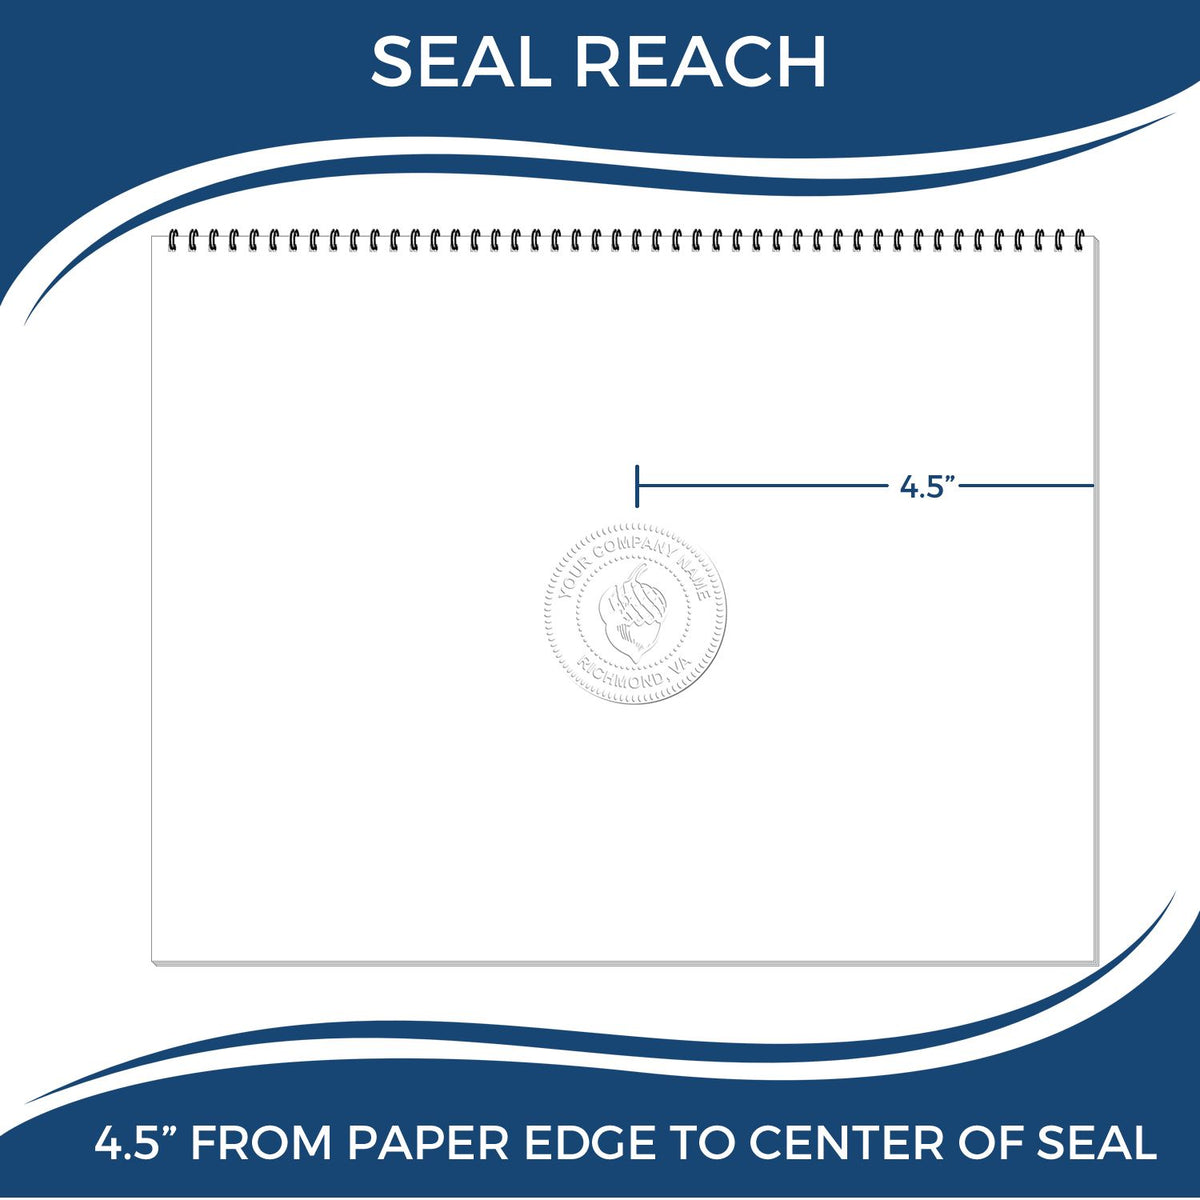 An infographic showing the seal reach which is represented by a ruler and a miniature seal image of the Extended Long Reach Michigan Surveyor Embosser